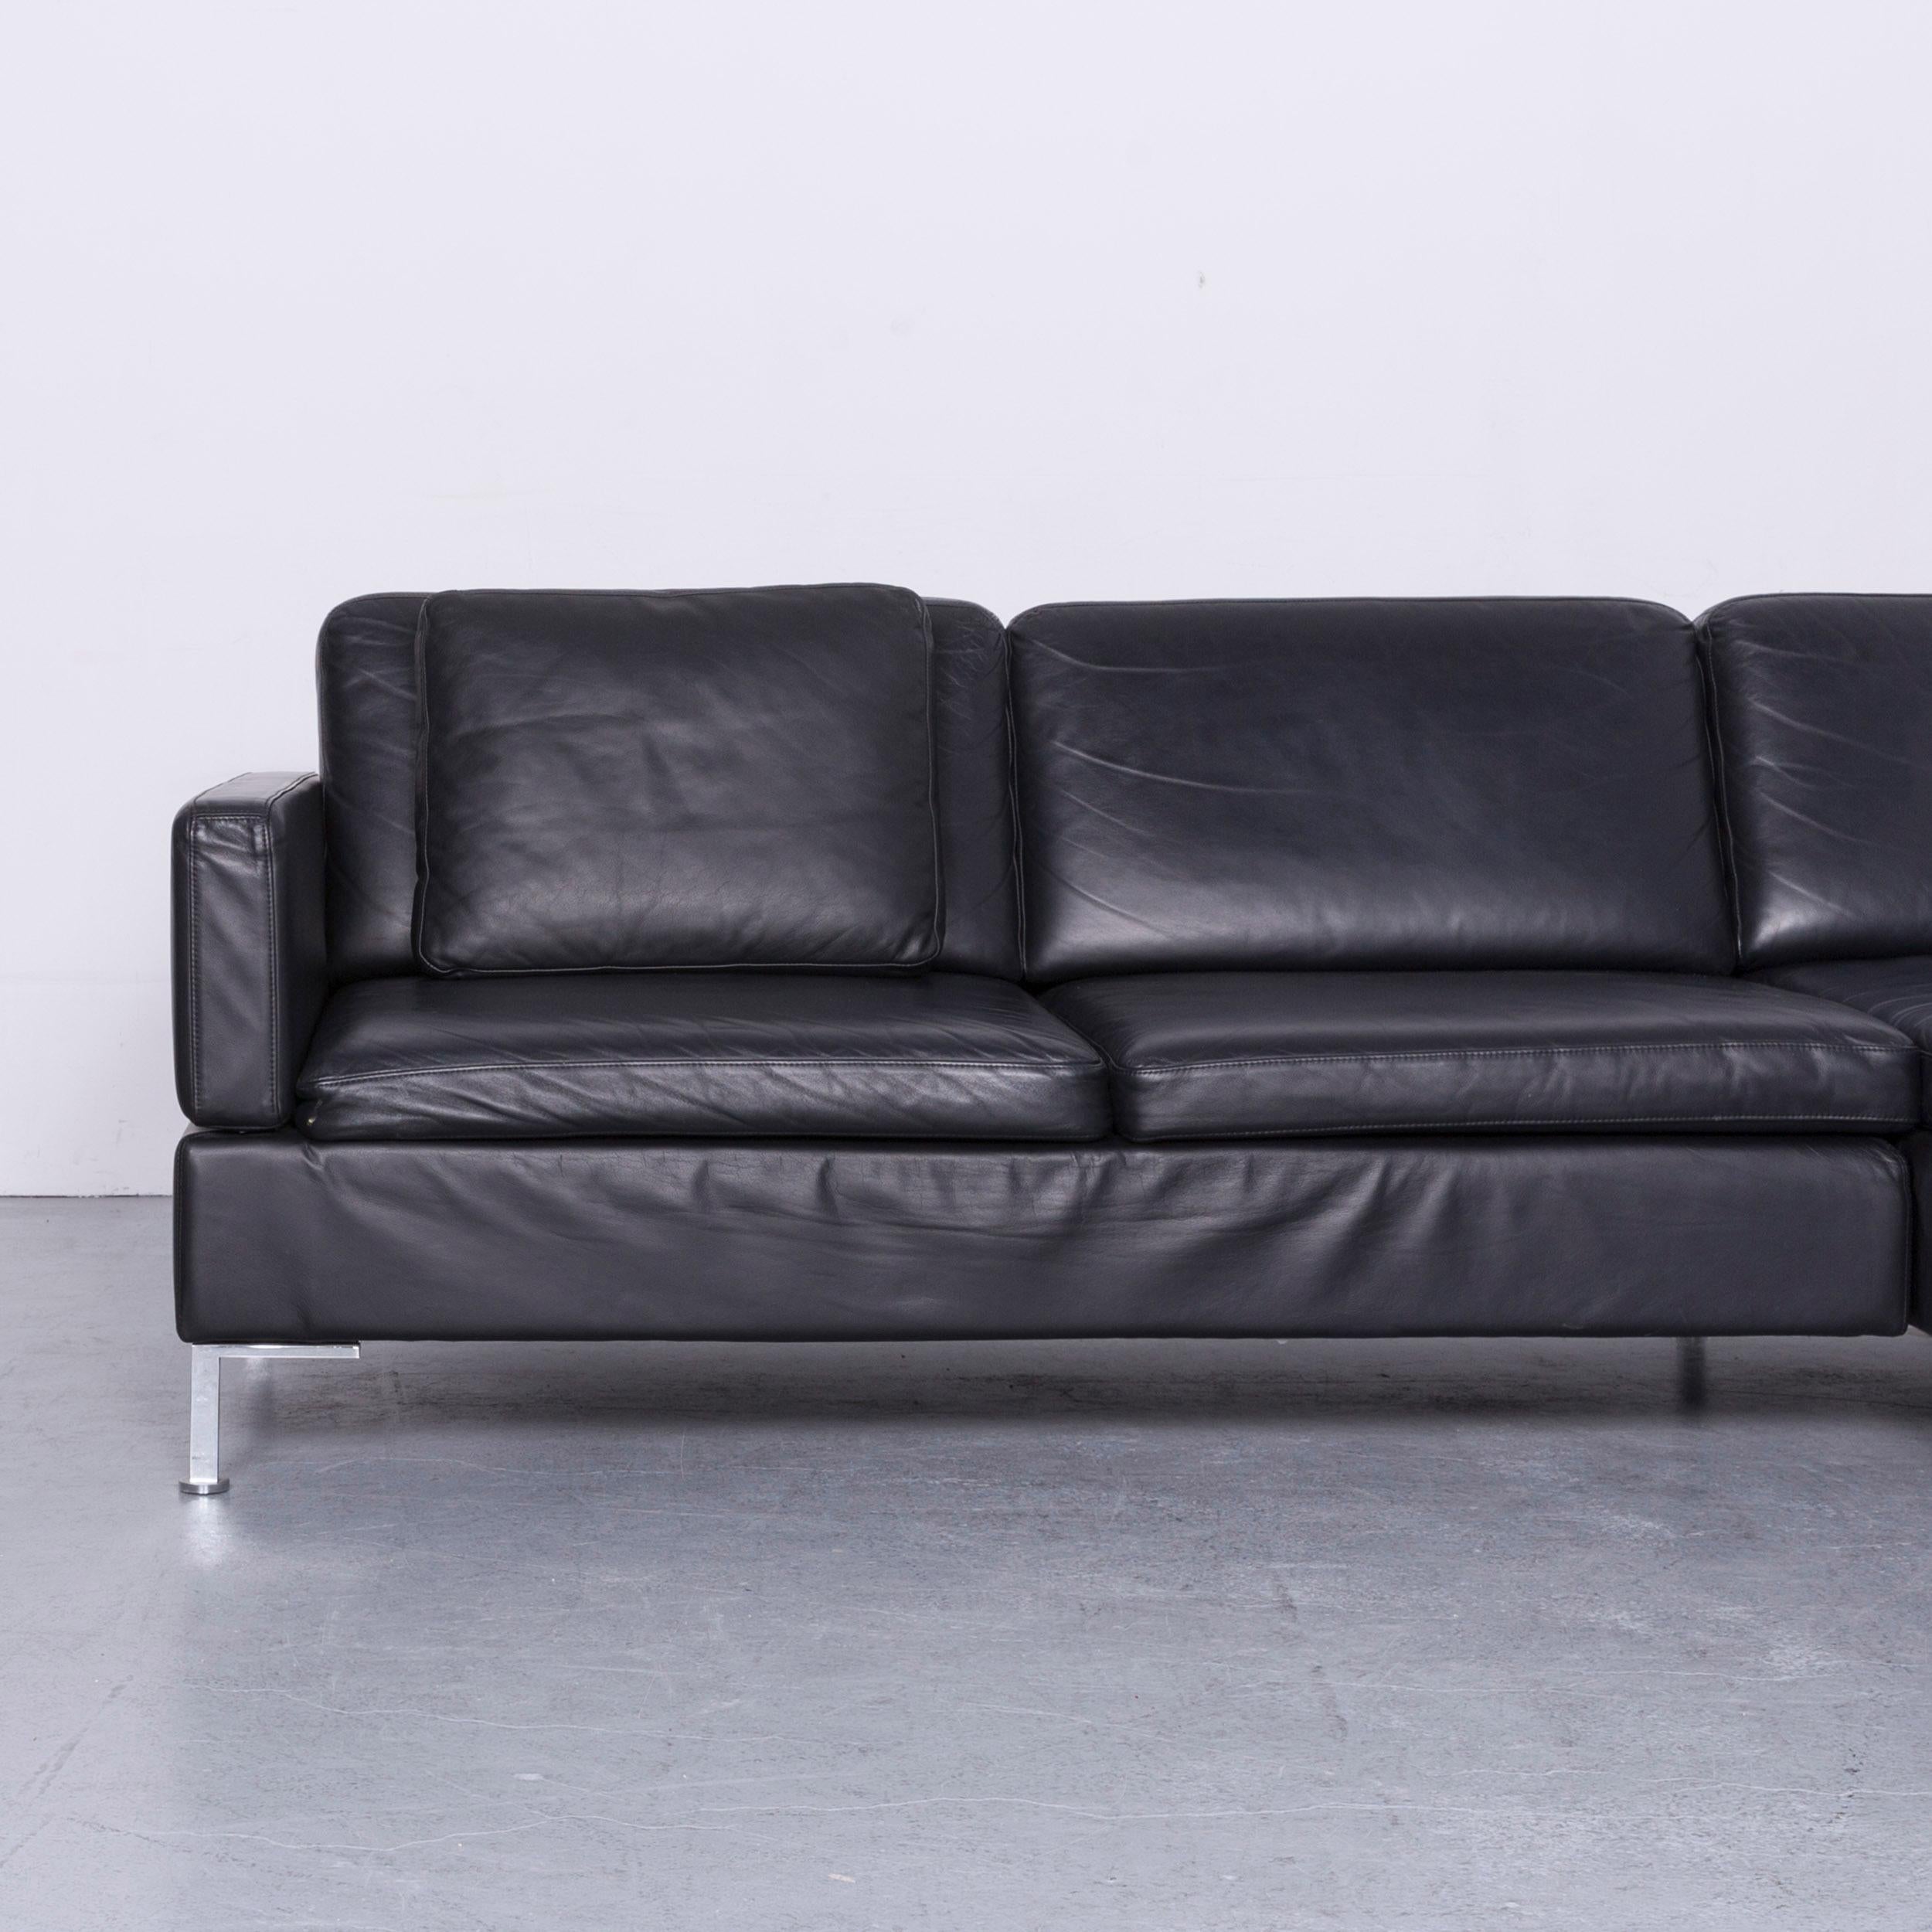 German Brühl & Sippold Alba Designer Corner-Sofa Black Leather Couch with Function